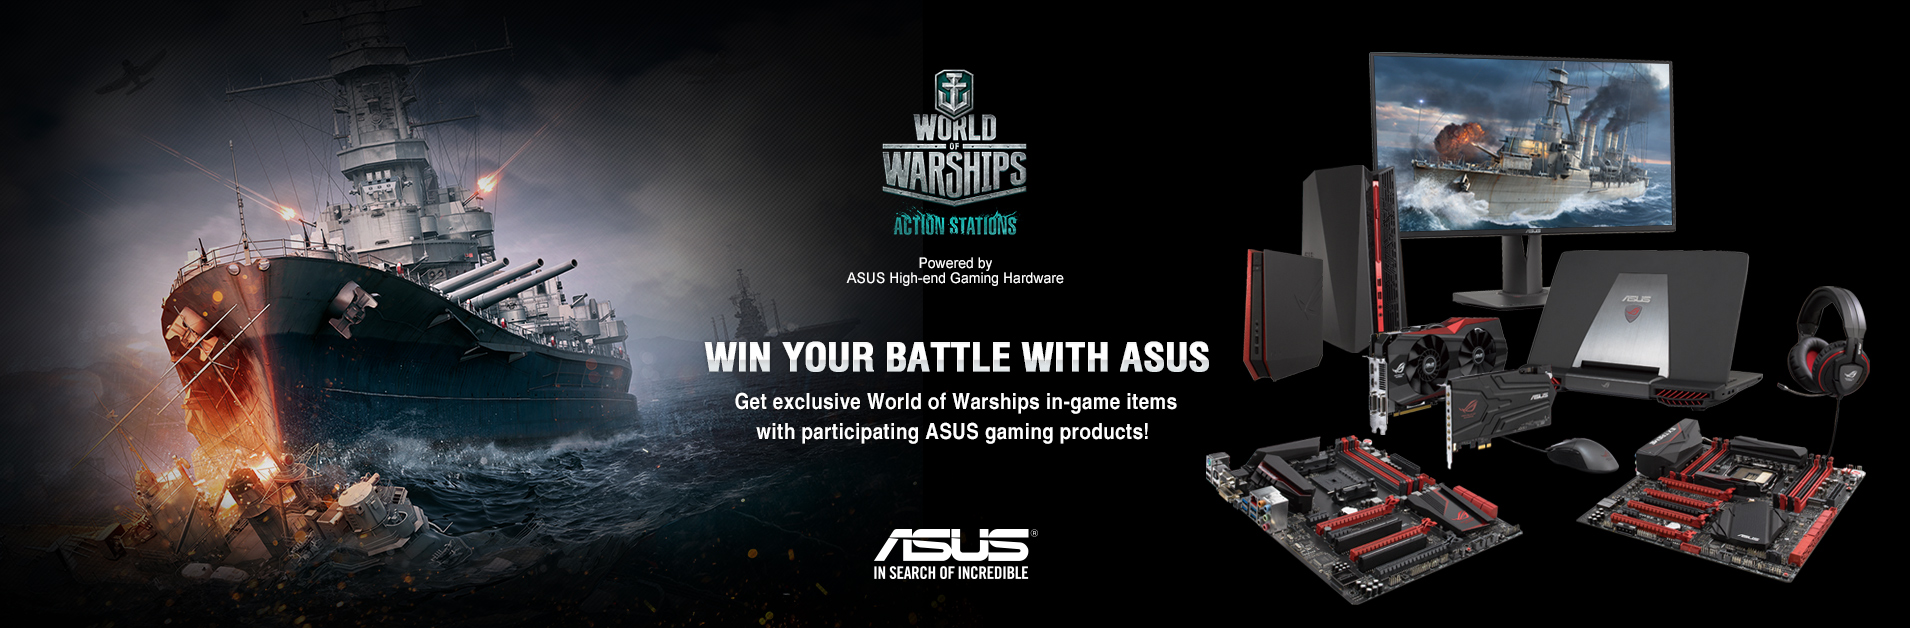 ASUS and World of Warships